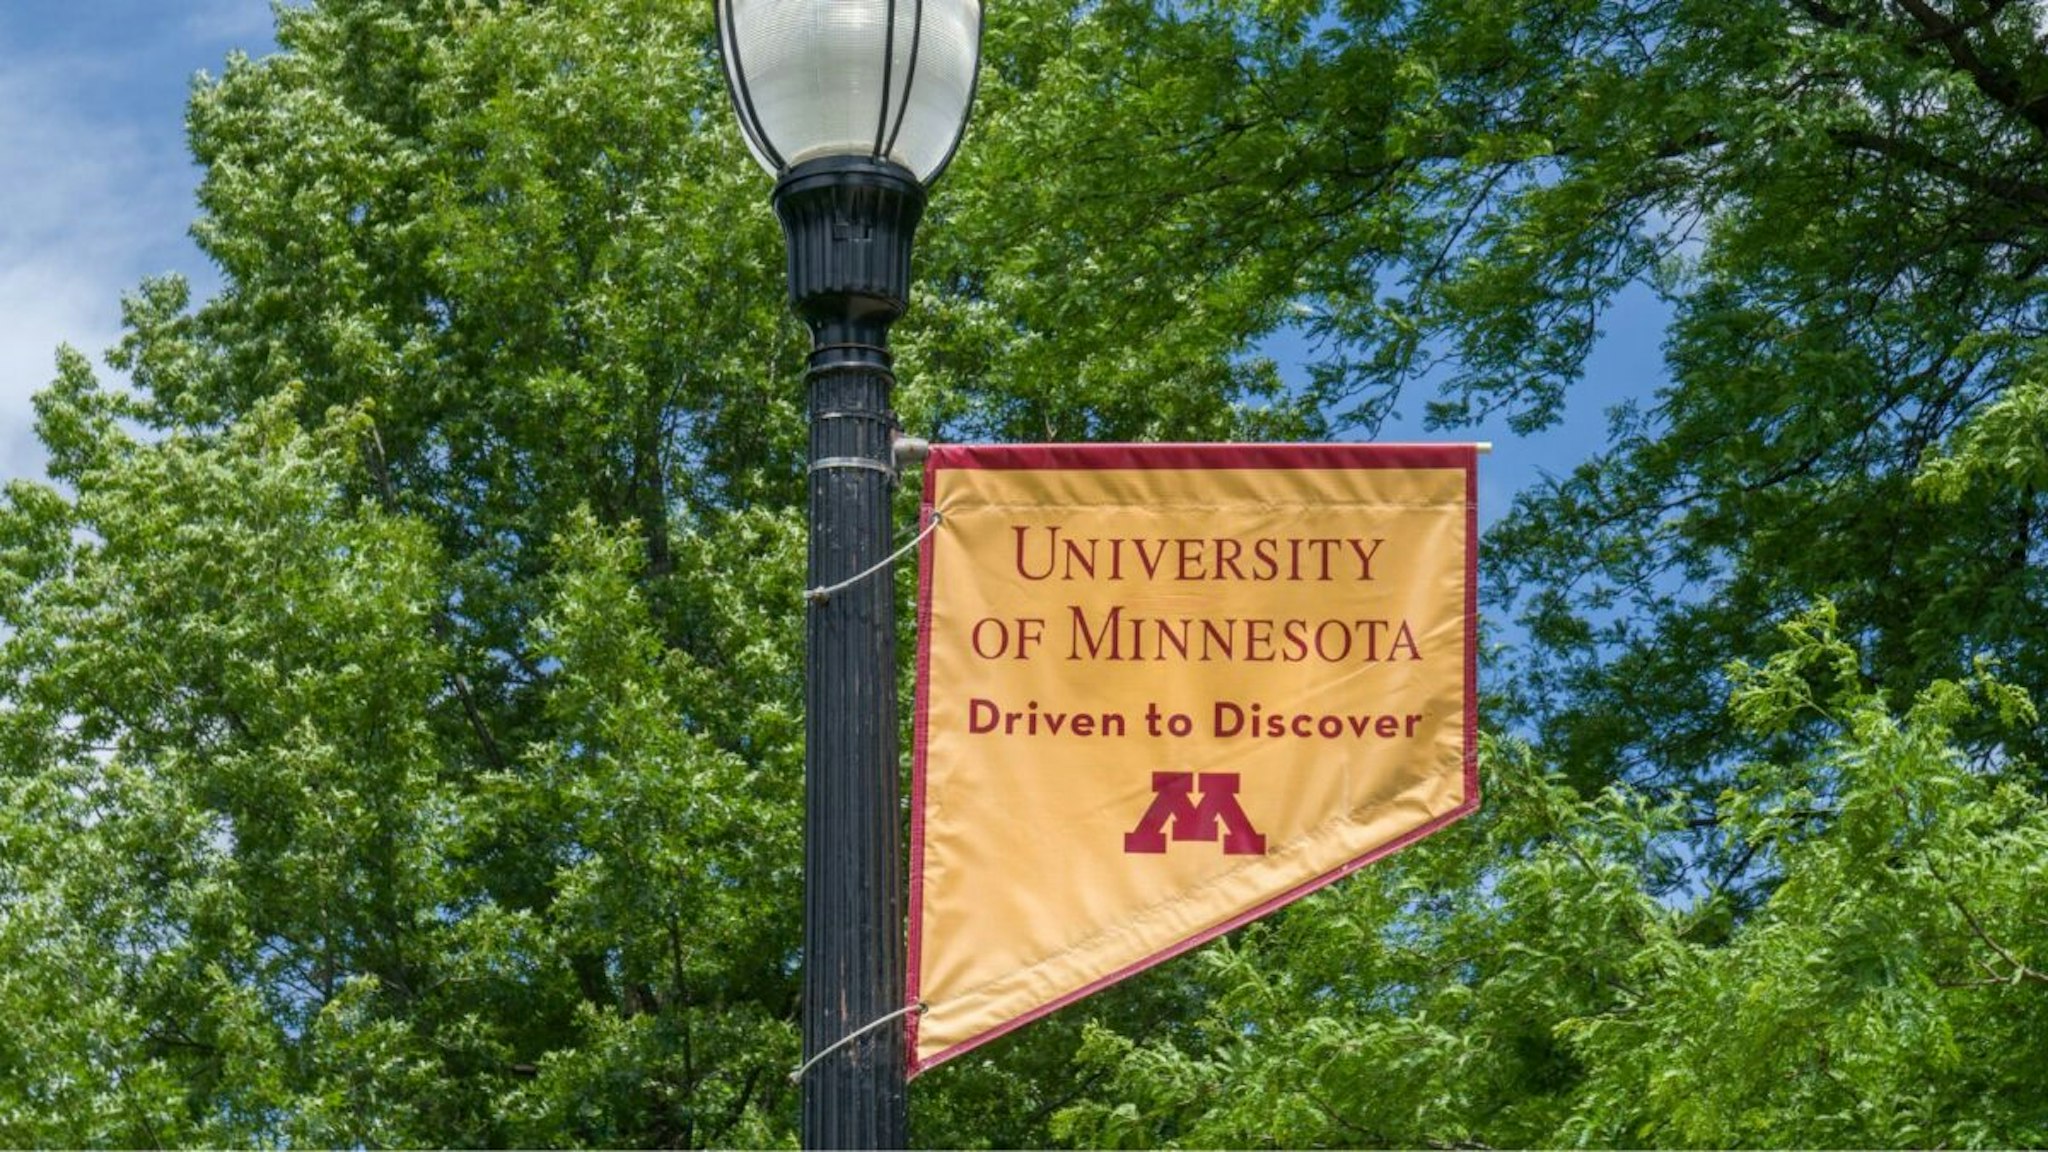 MINNEAPOLIS, MN/USA - JUNE 28, 2018: Campus colors and emblem on the campus of the University of Minnesota.